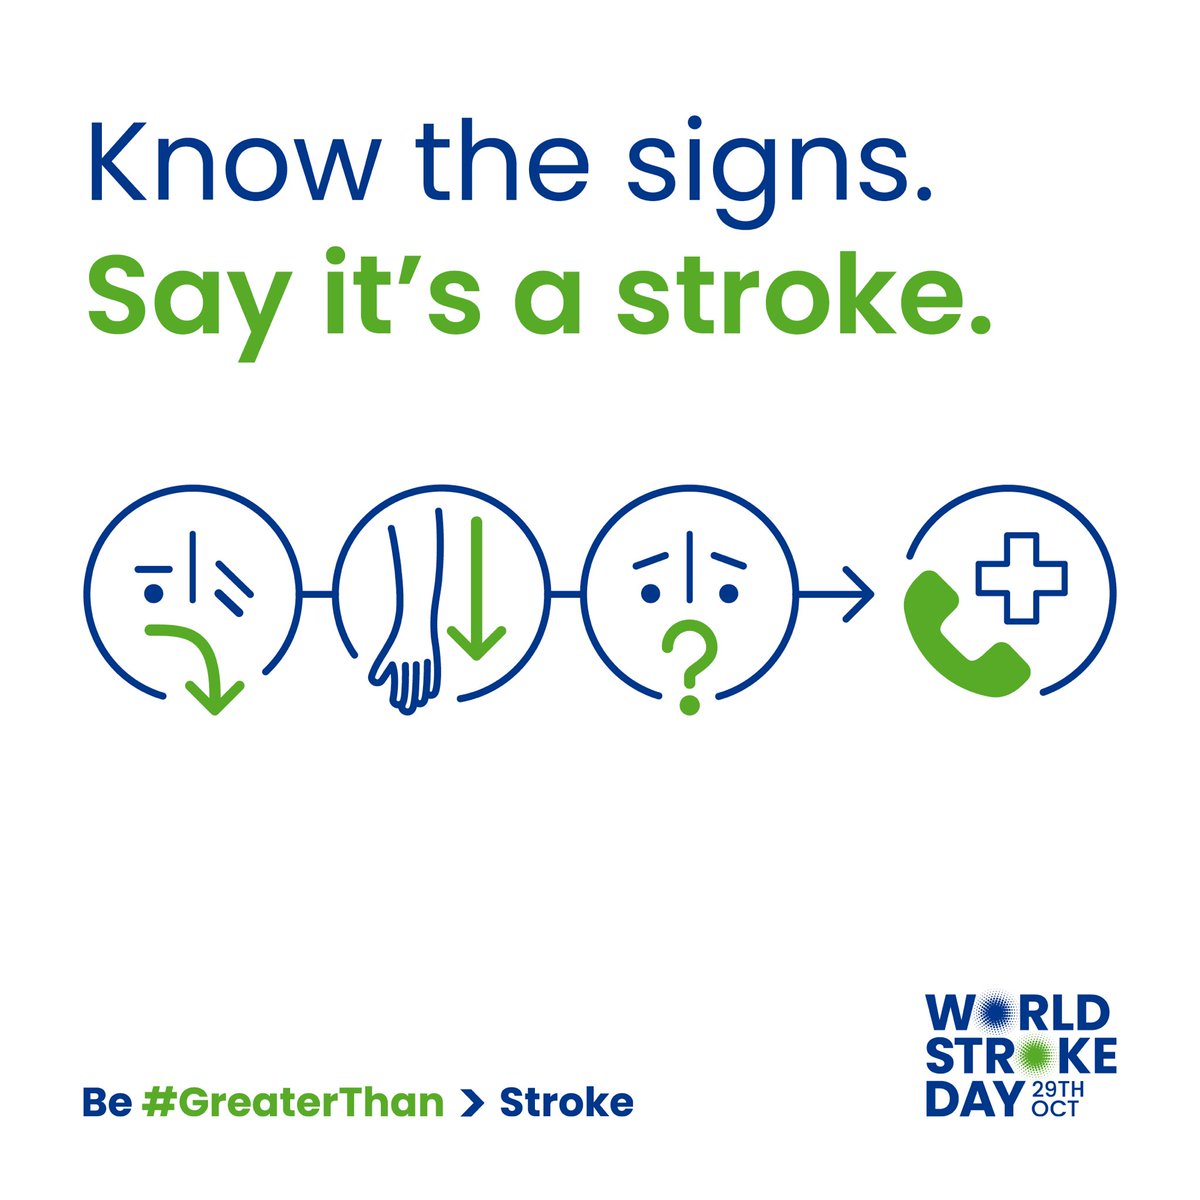 Stroke strikes every 5mins in the UK. It can happen to anyone, of any age, at any time. Today is #WorldStrokeDay and the date I experienced firsthand how devastating effects of stroke can be for a whole family. So I share the signs with purpose. Know #FAST it could save a life 💜